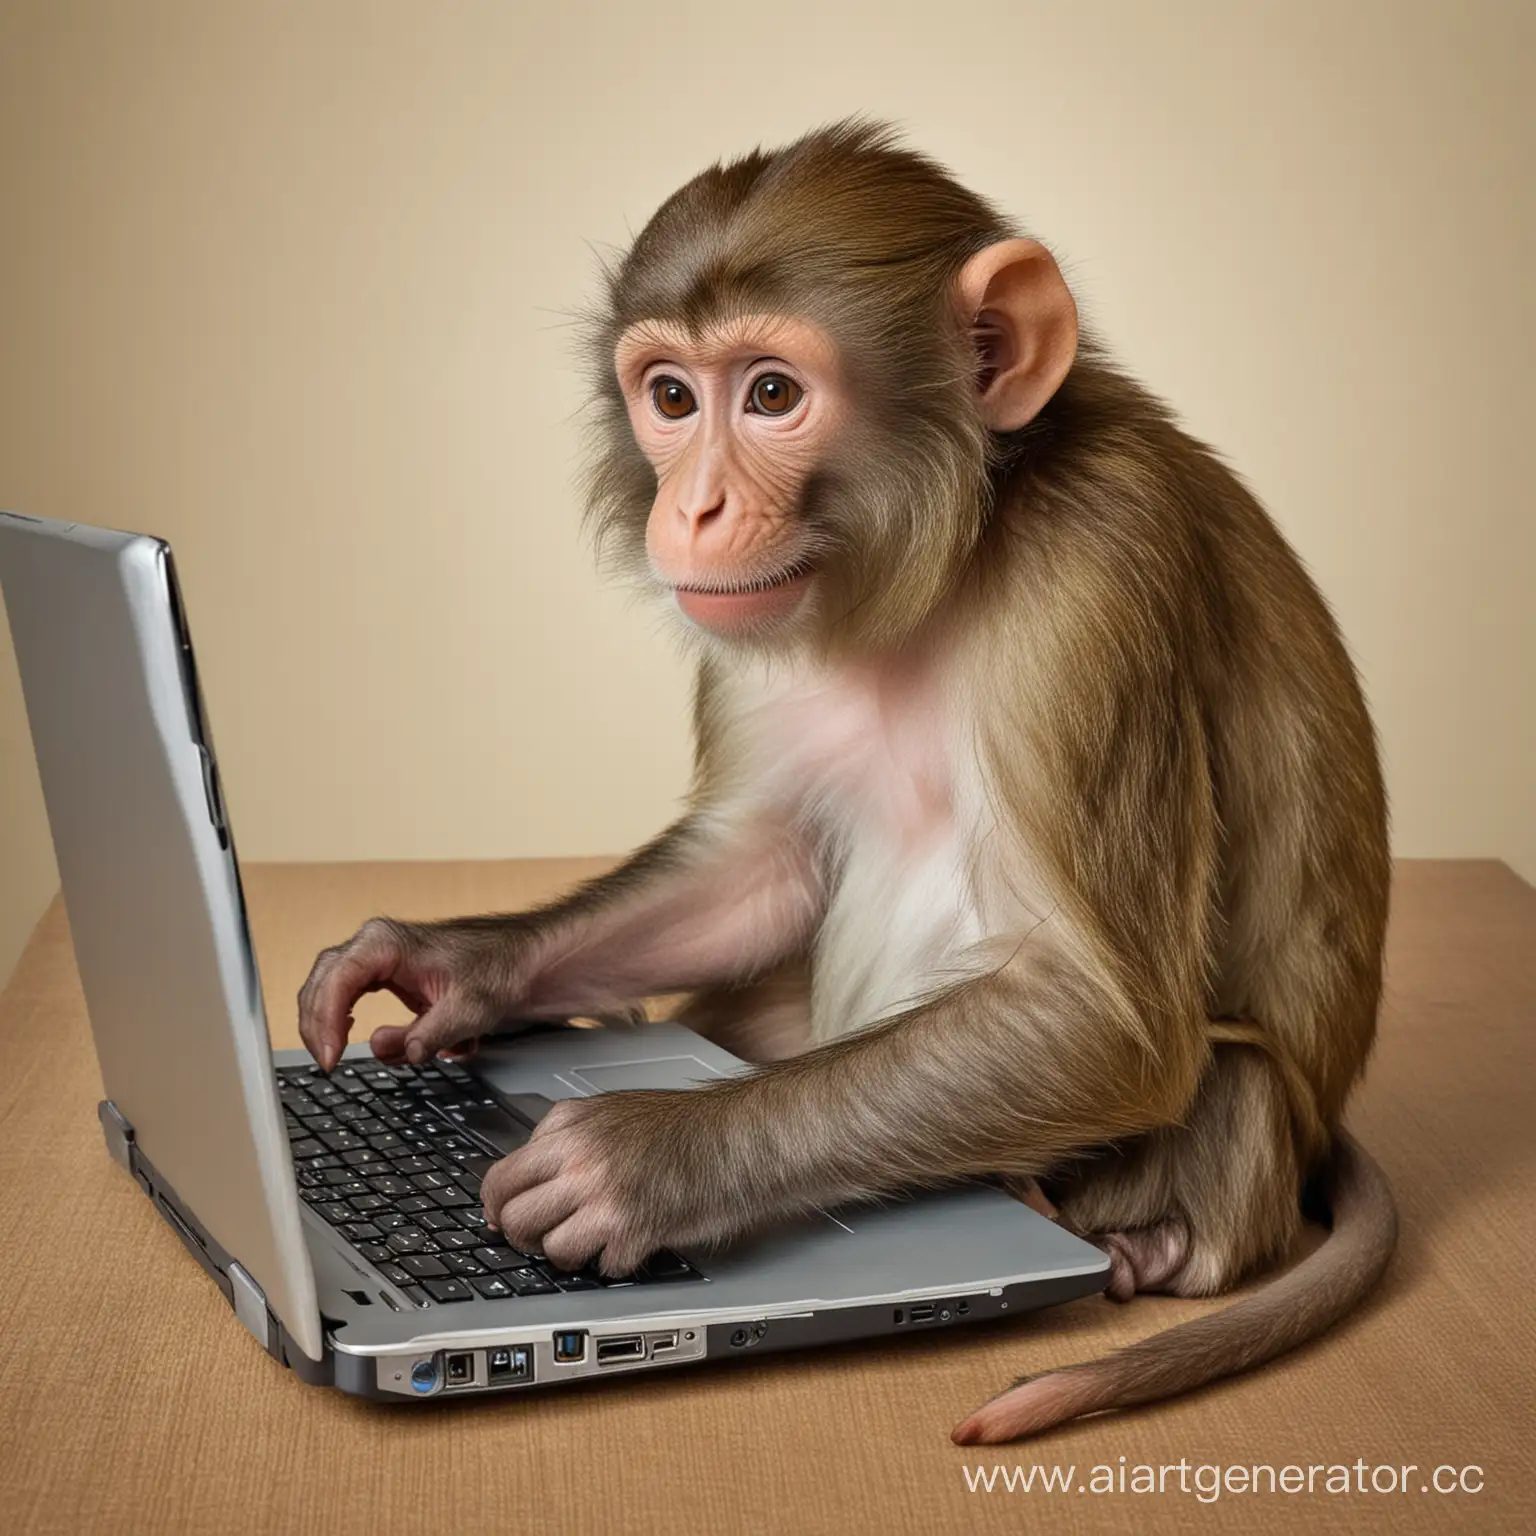 Playful-Monkey-Typing-on-a-Laptop-in-a-Tropical-Jungle